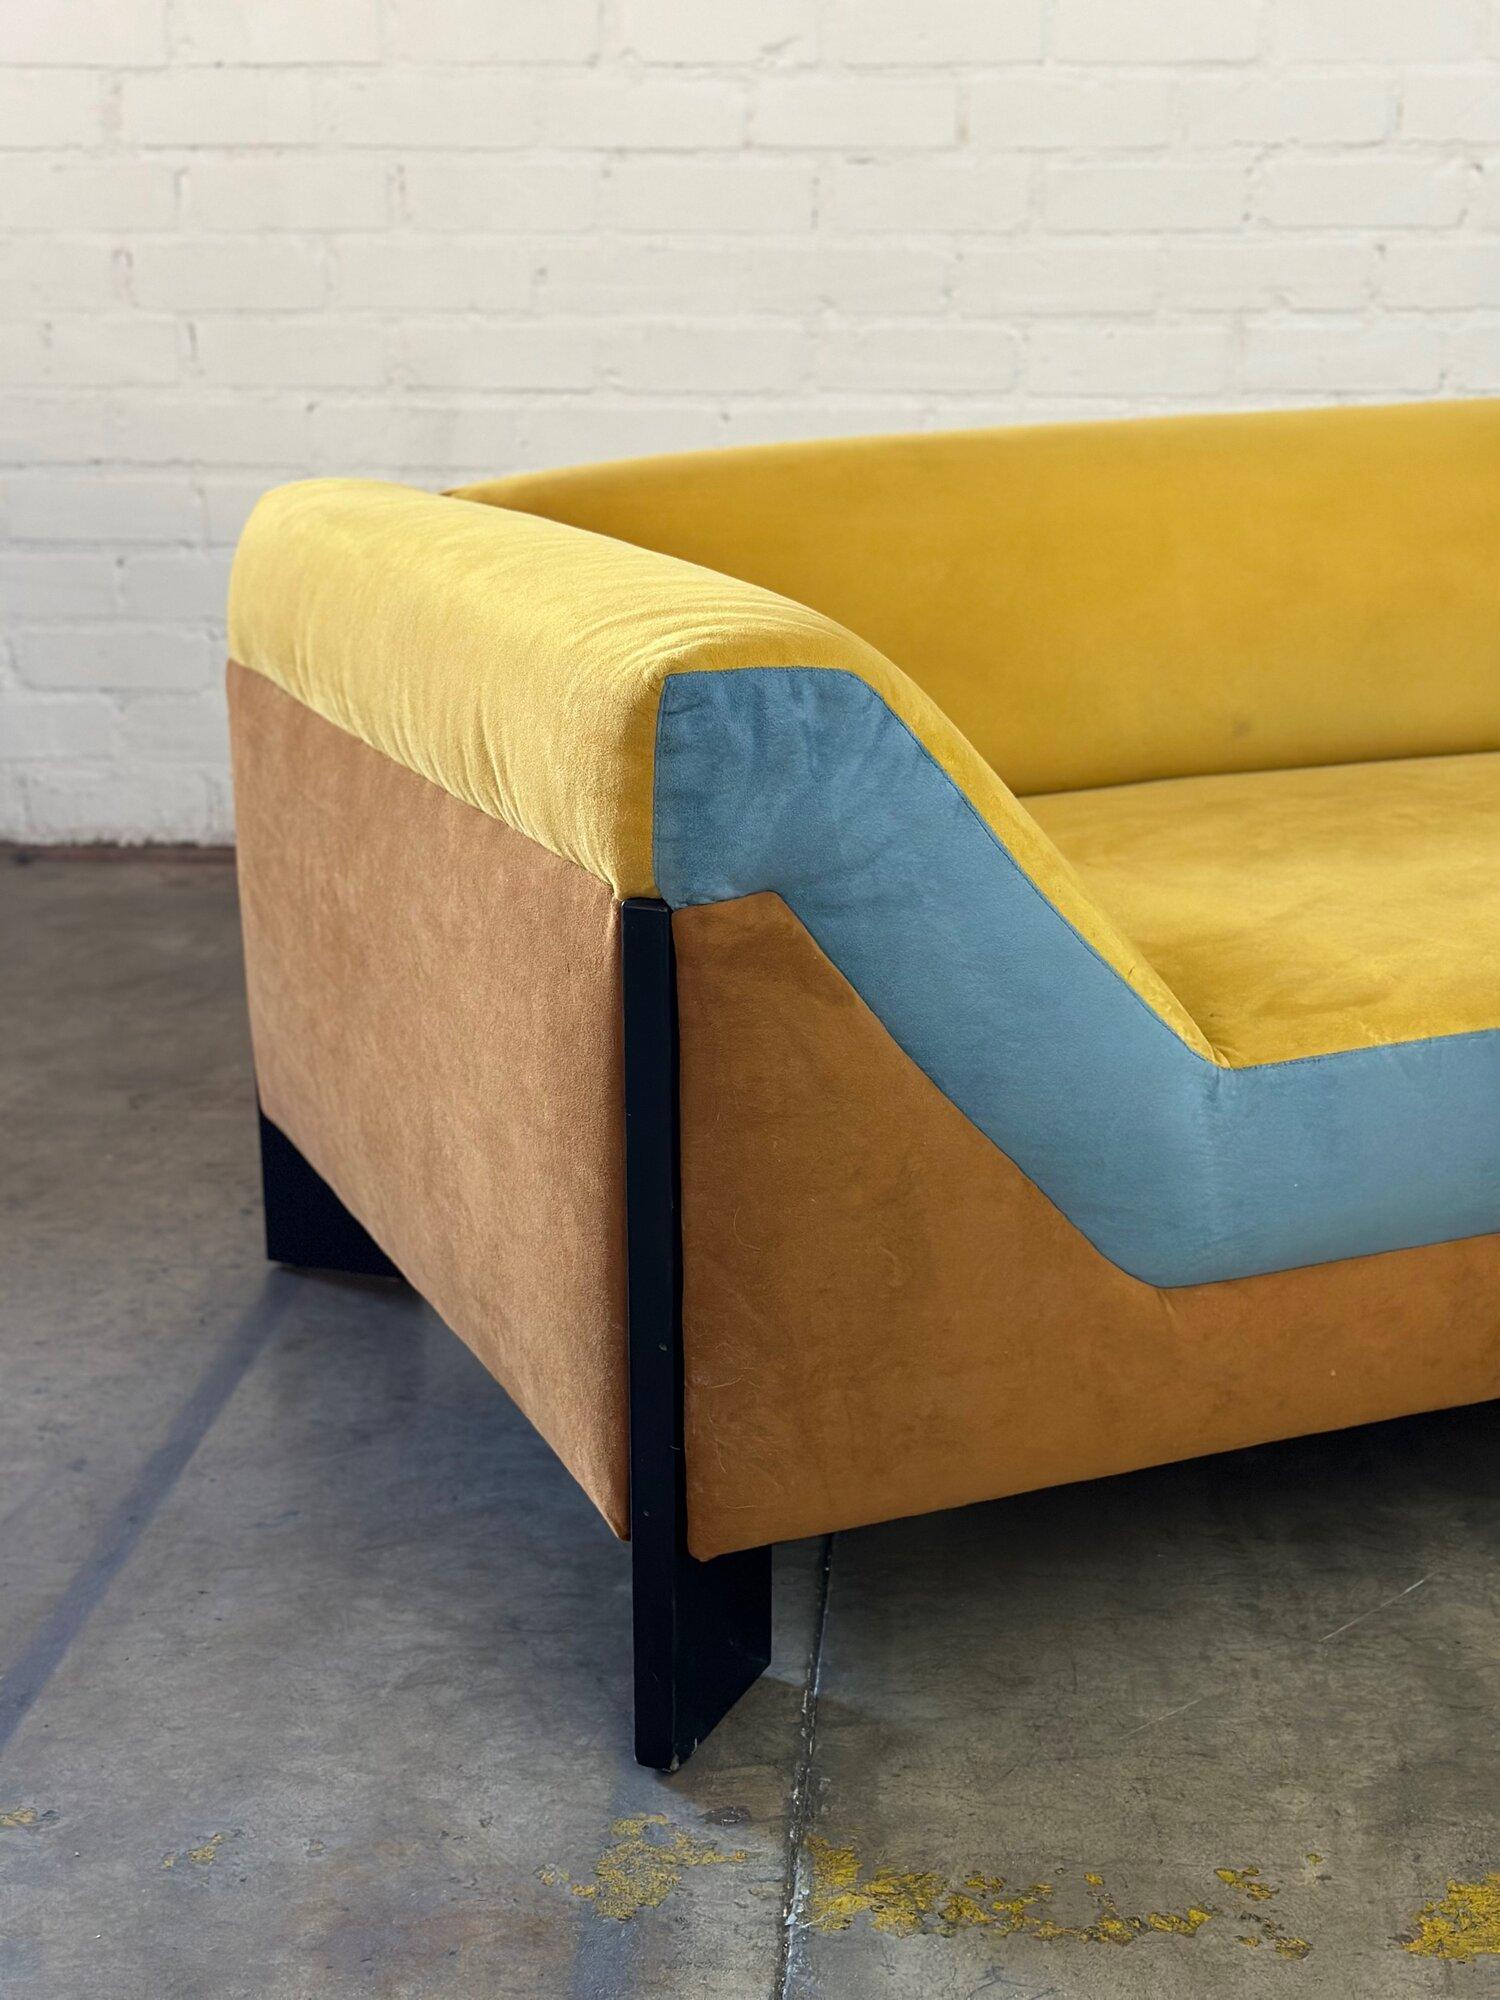 70s Retro Style “Open Arms Sofa” - AS IS 1